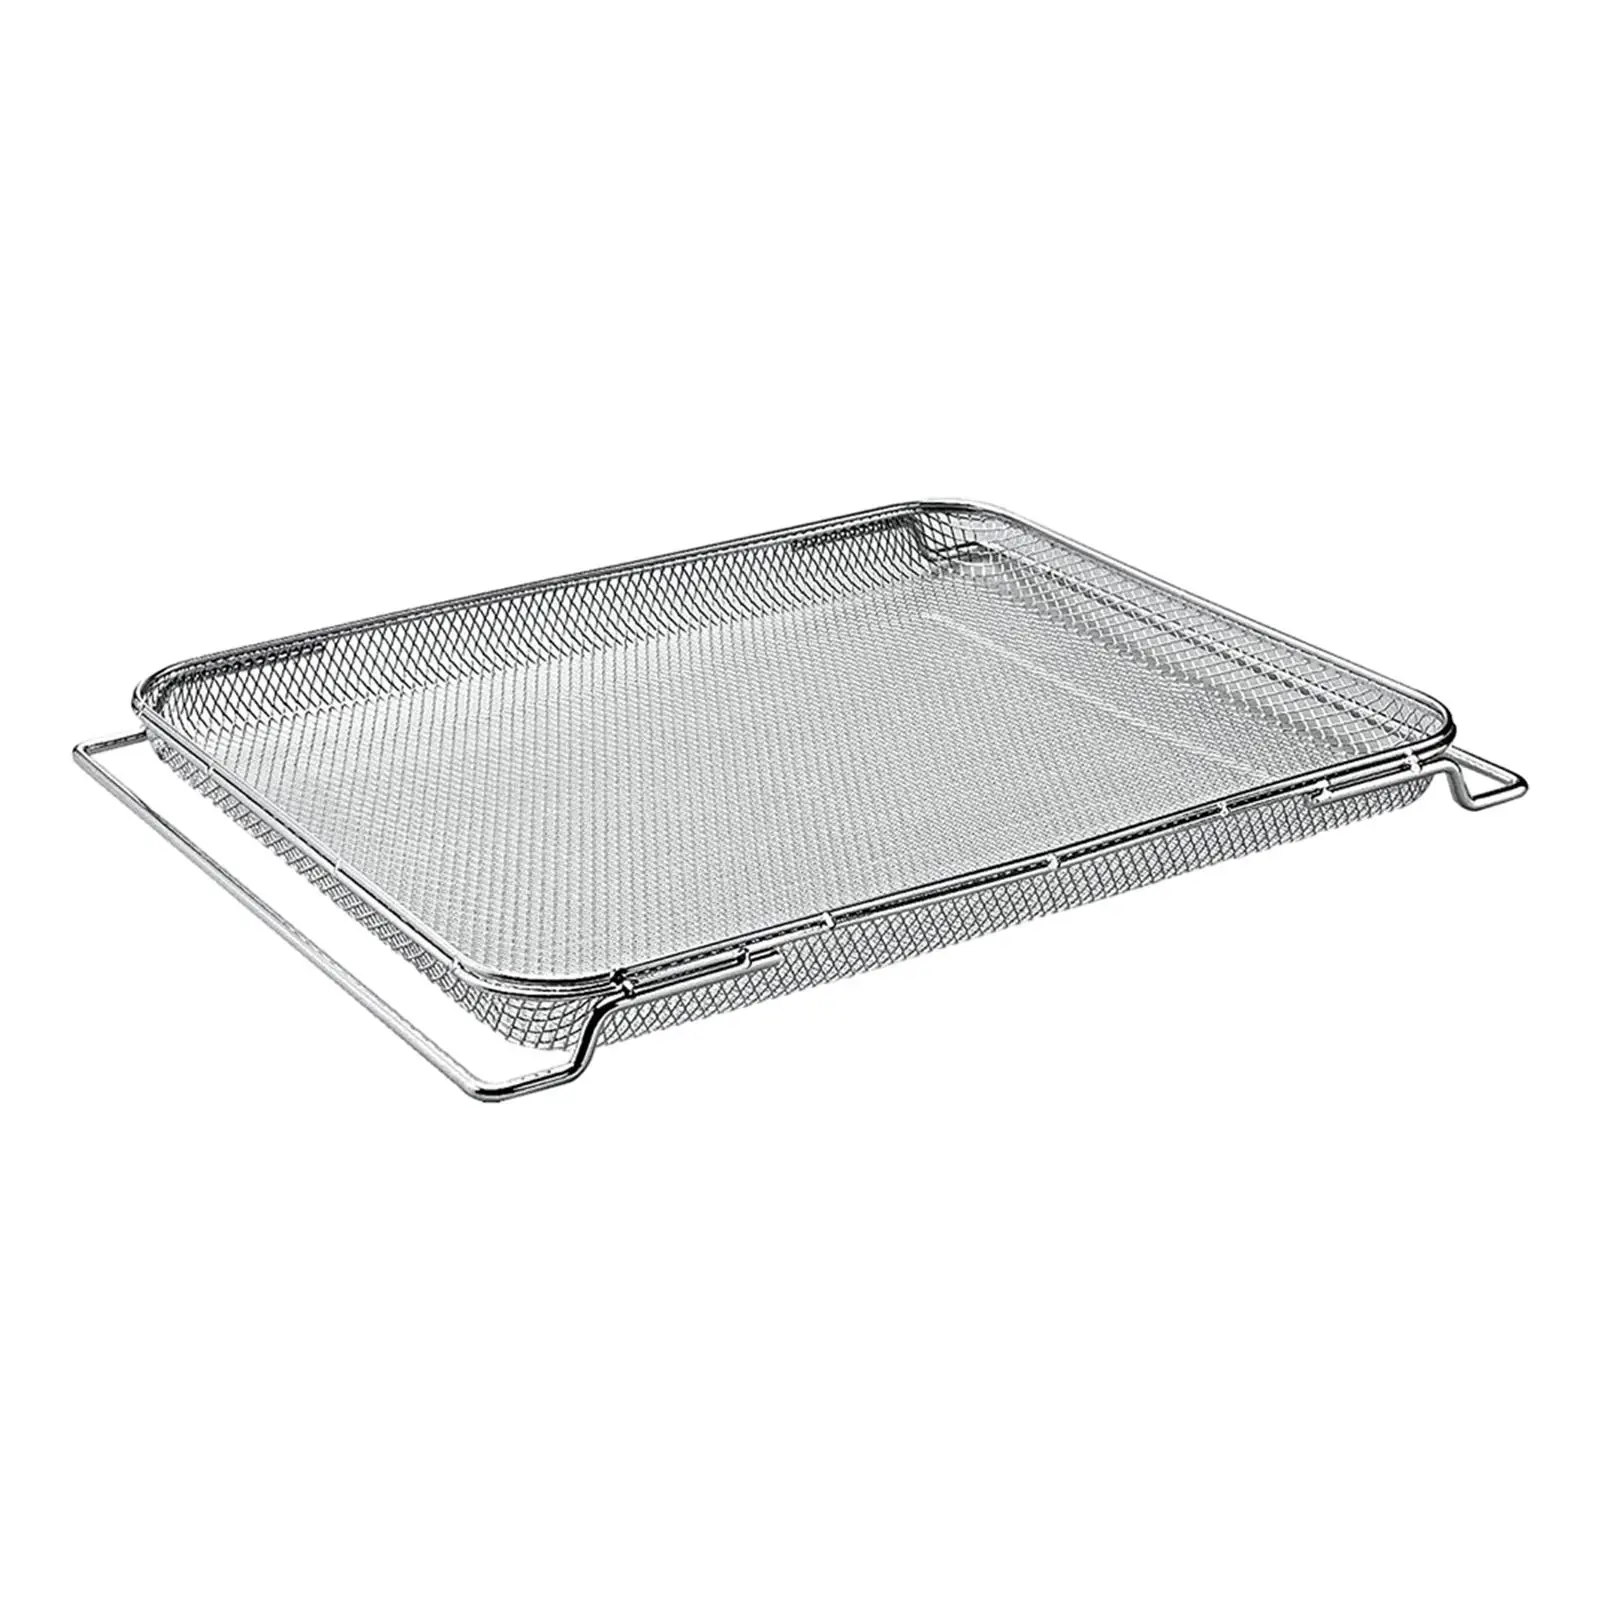 Oven Grill Mesh 14.4 x 11.4 inch Oven Tools Wire Rack Roasting Basket Grill Mesh Basket Multifunctional for Fries Bacons Chicken